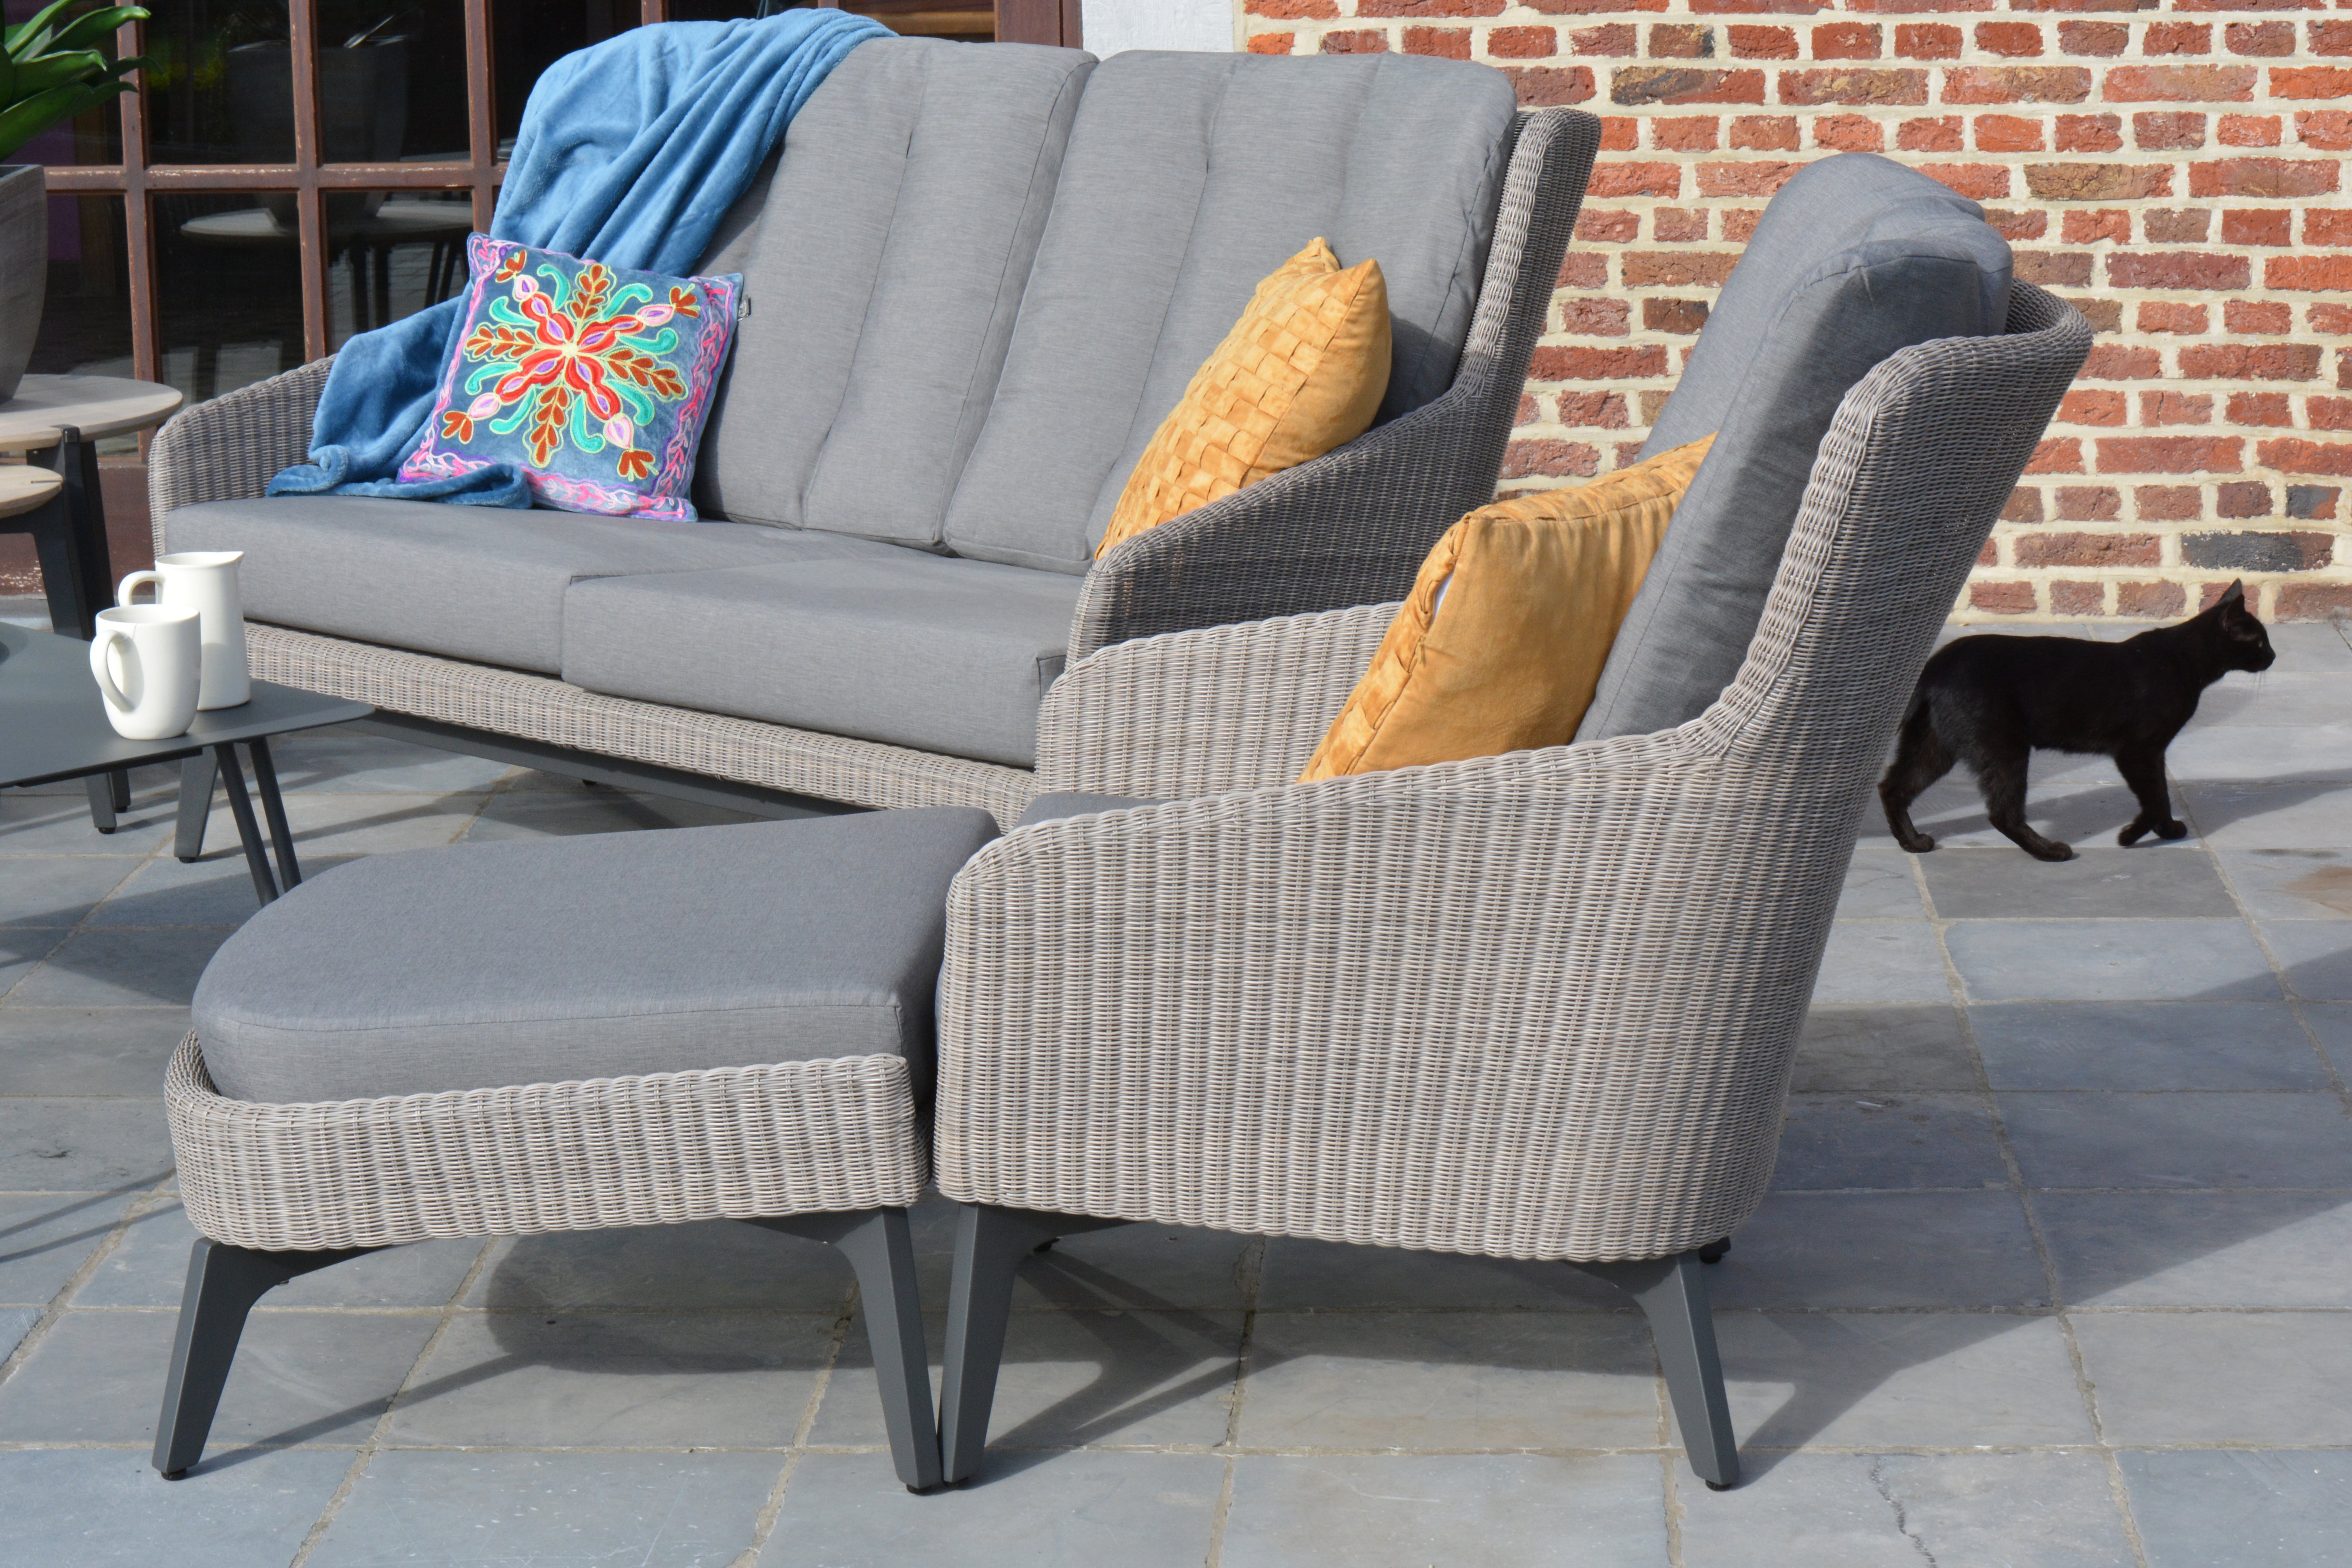 4 Seasons Outdoor Luxor Footstool With Cushion